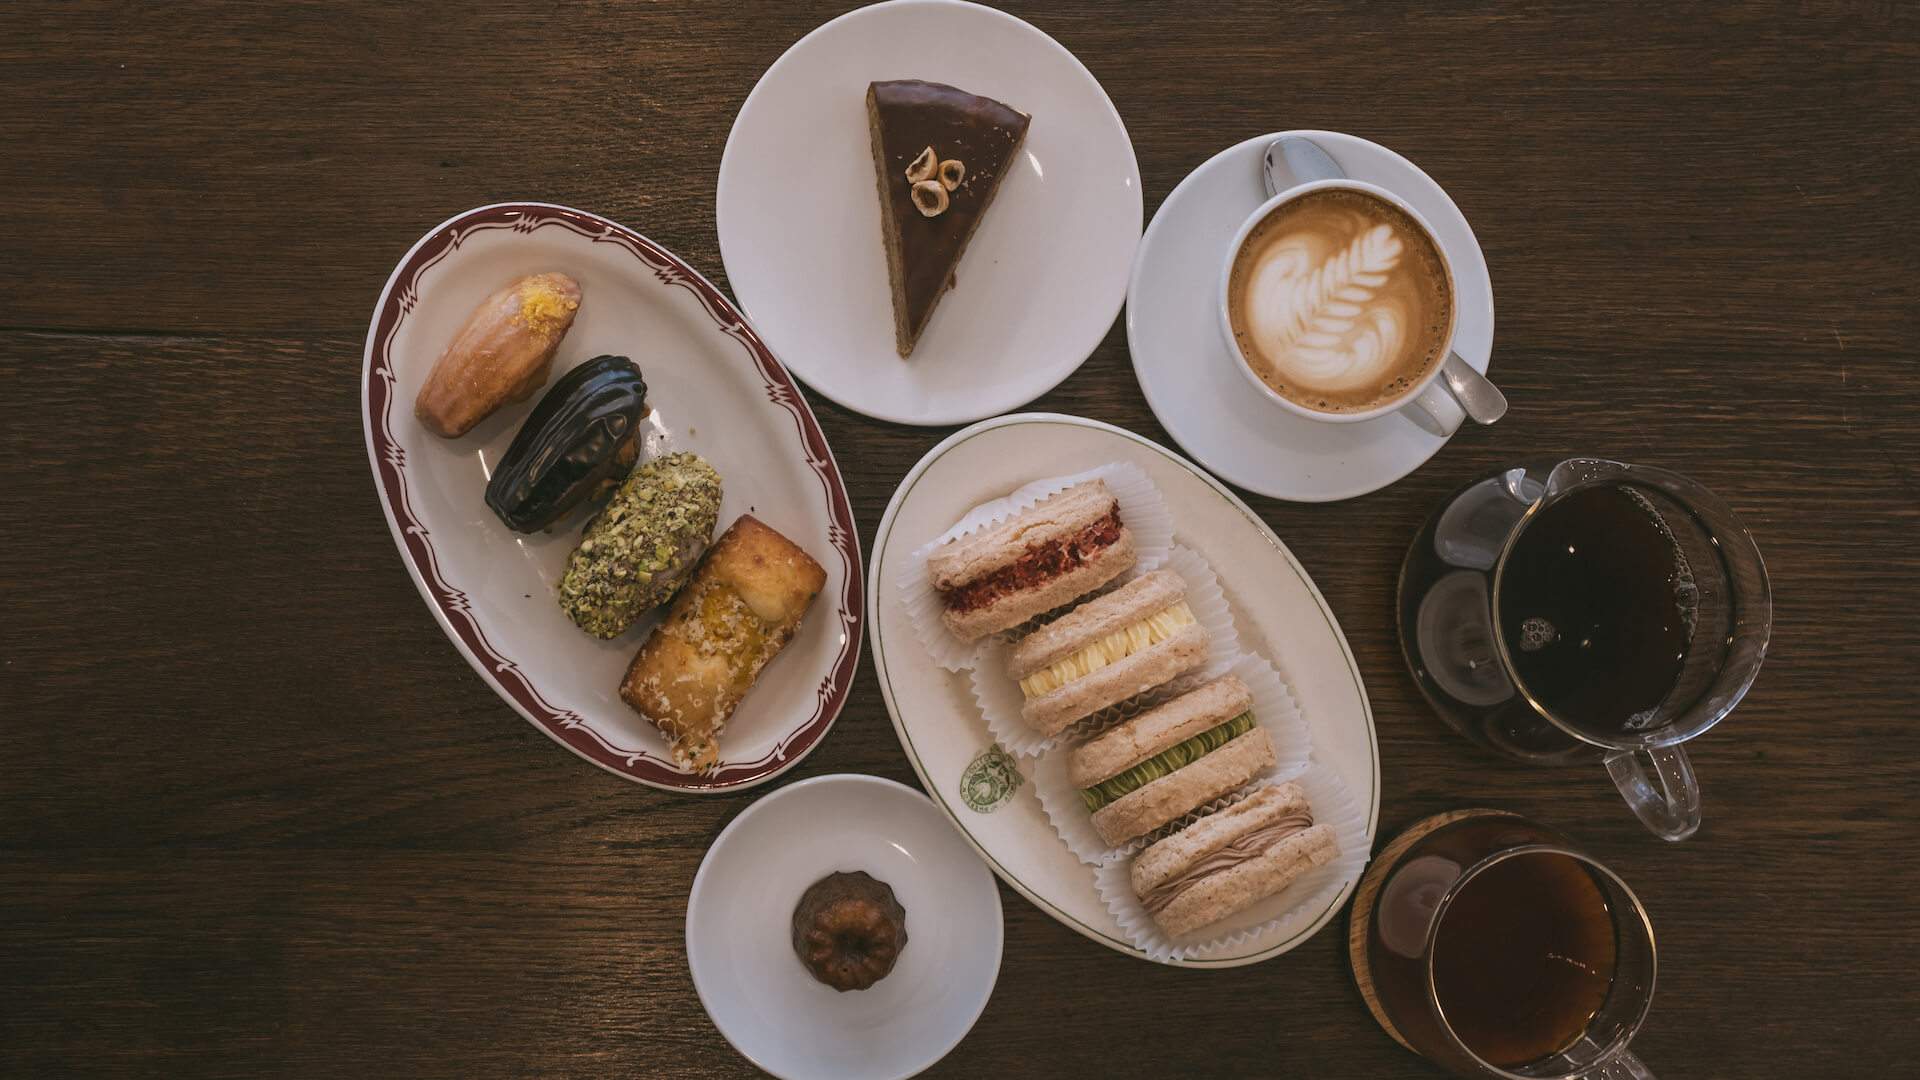 Cakes and coffee at The Flour - cafe in West Melbourne